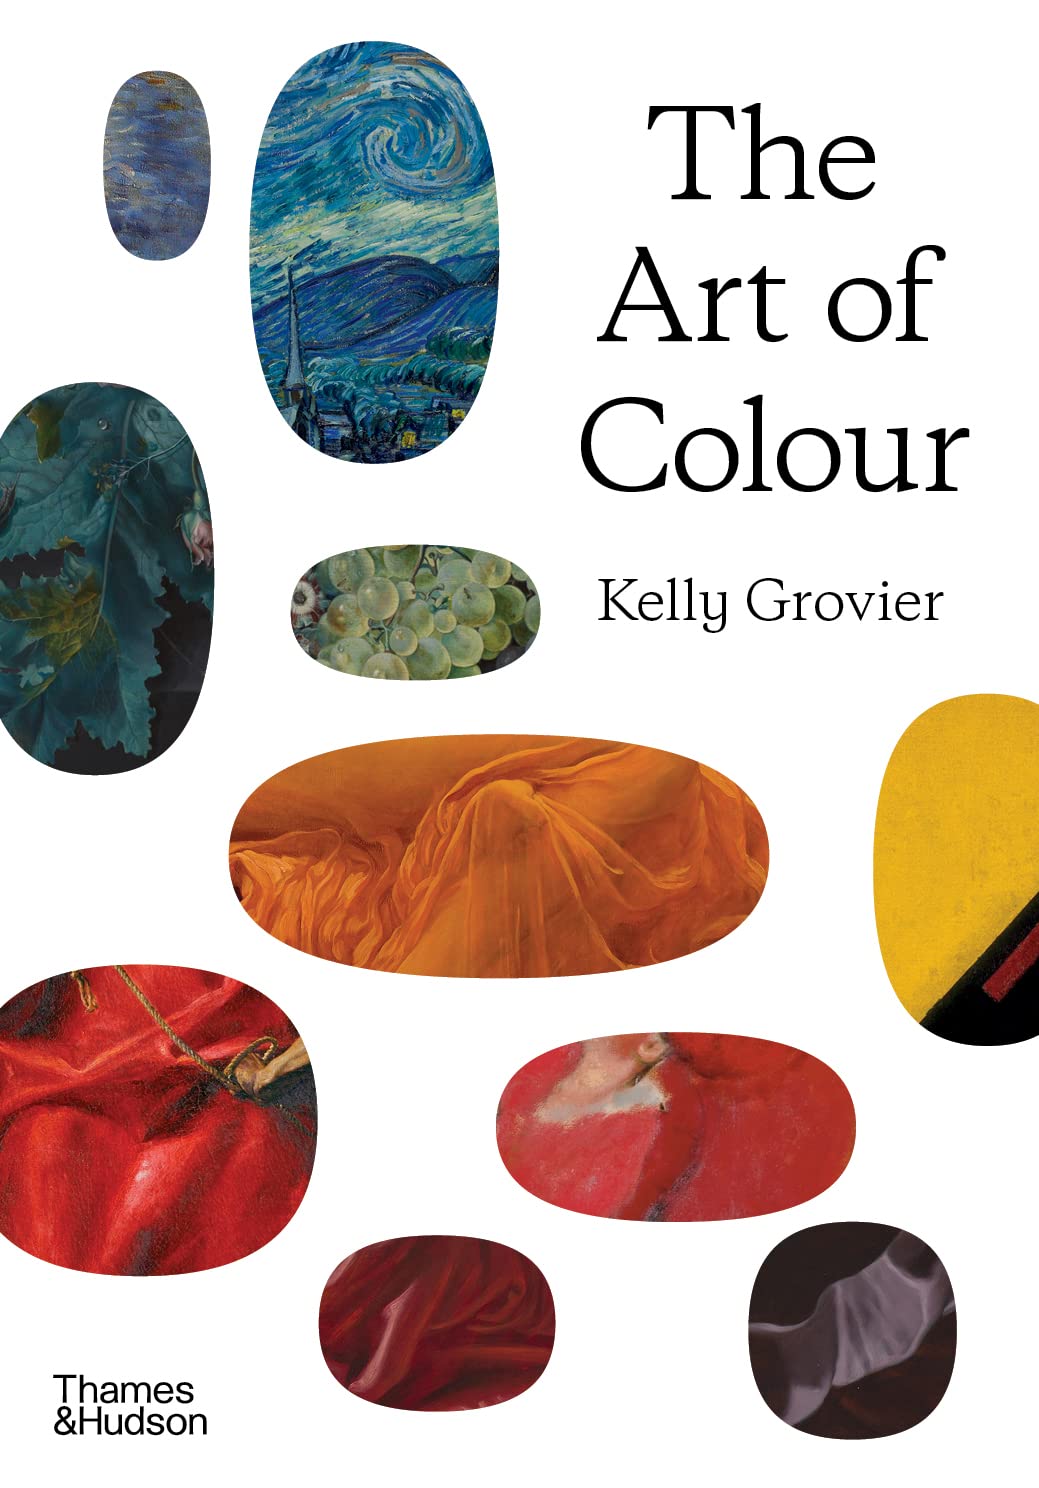 The Art of Colour: The History of Art in 39 Pigments